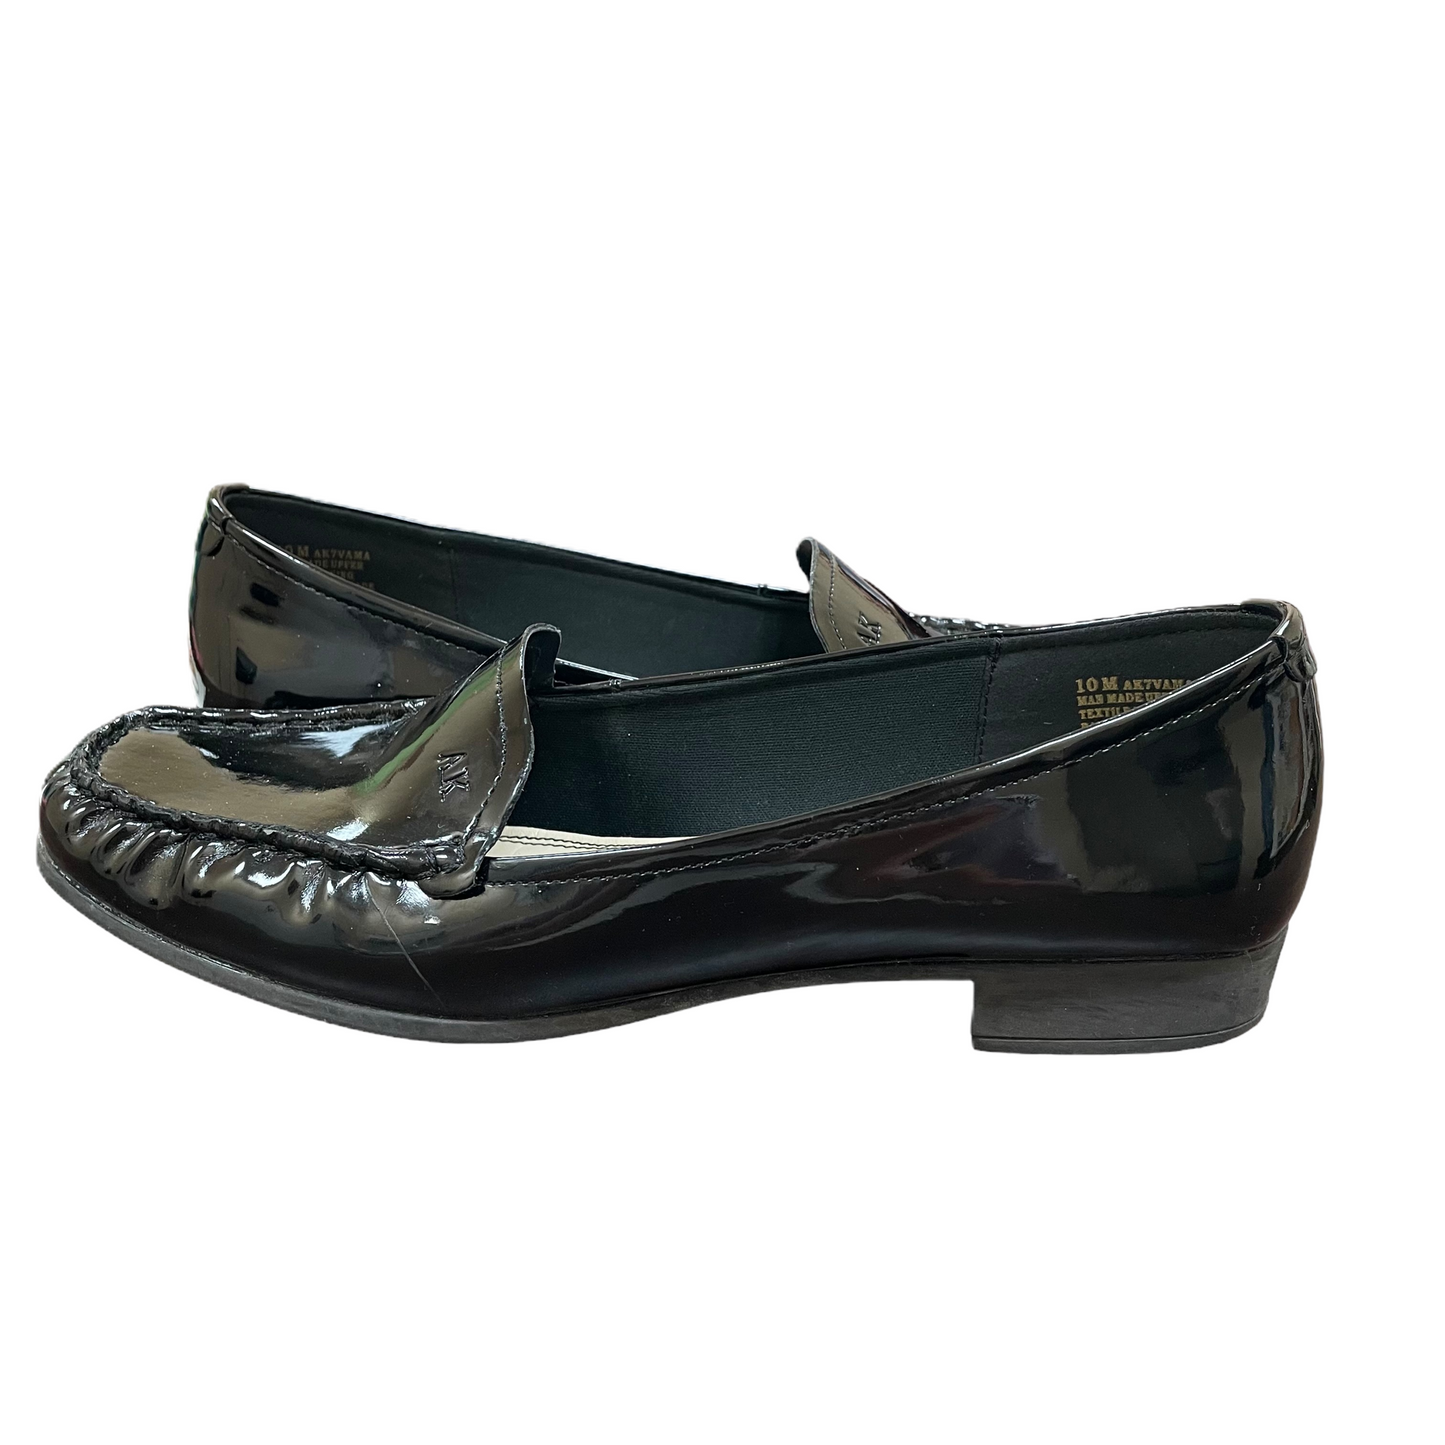 Black Shoes Flats By Anne Klein, Size: 10